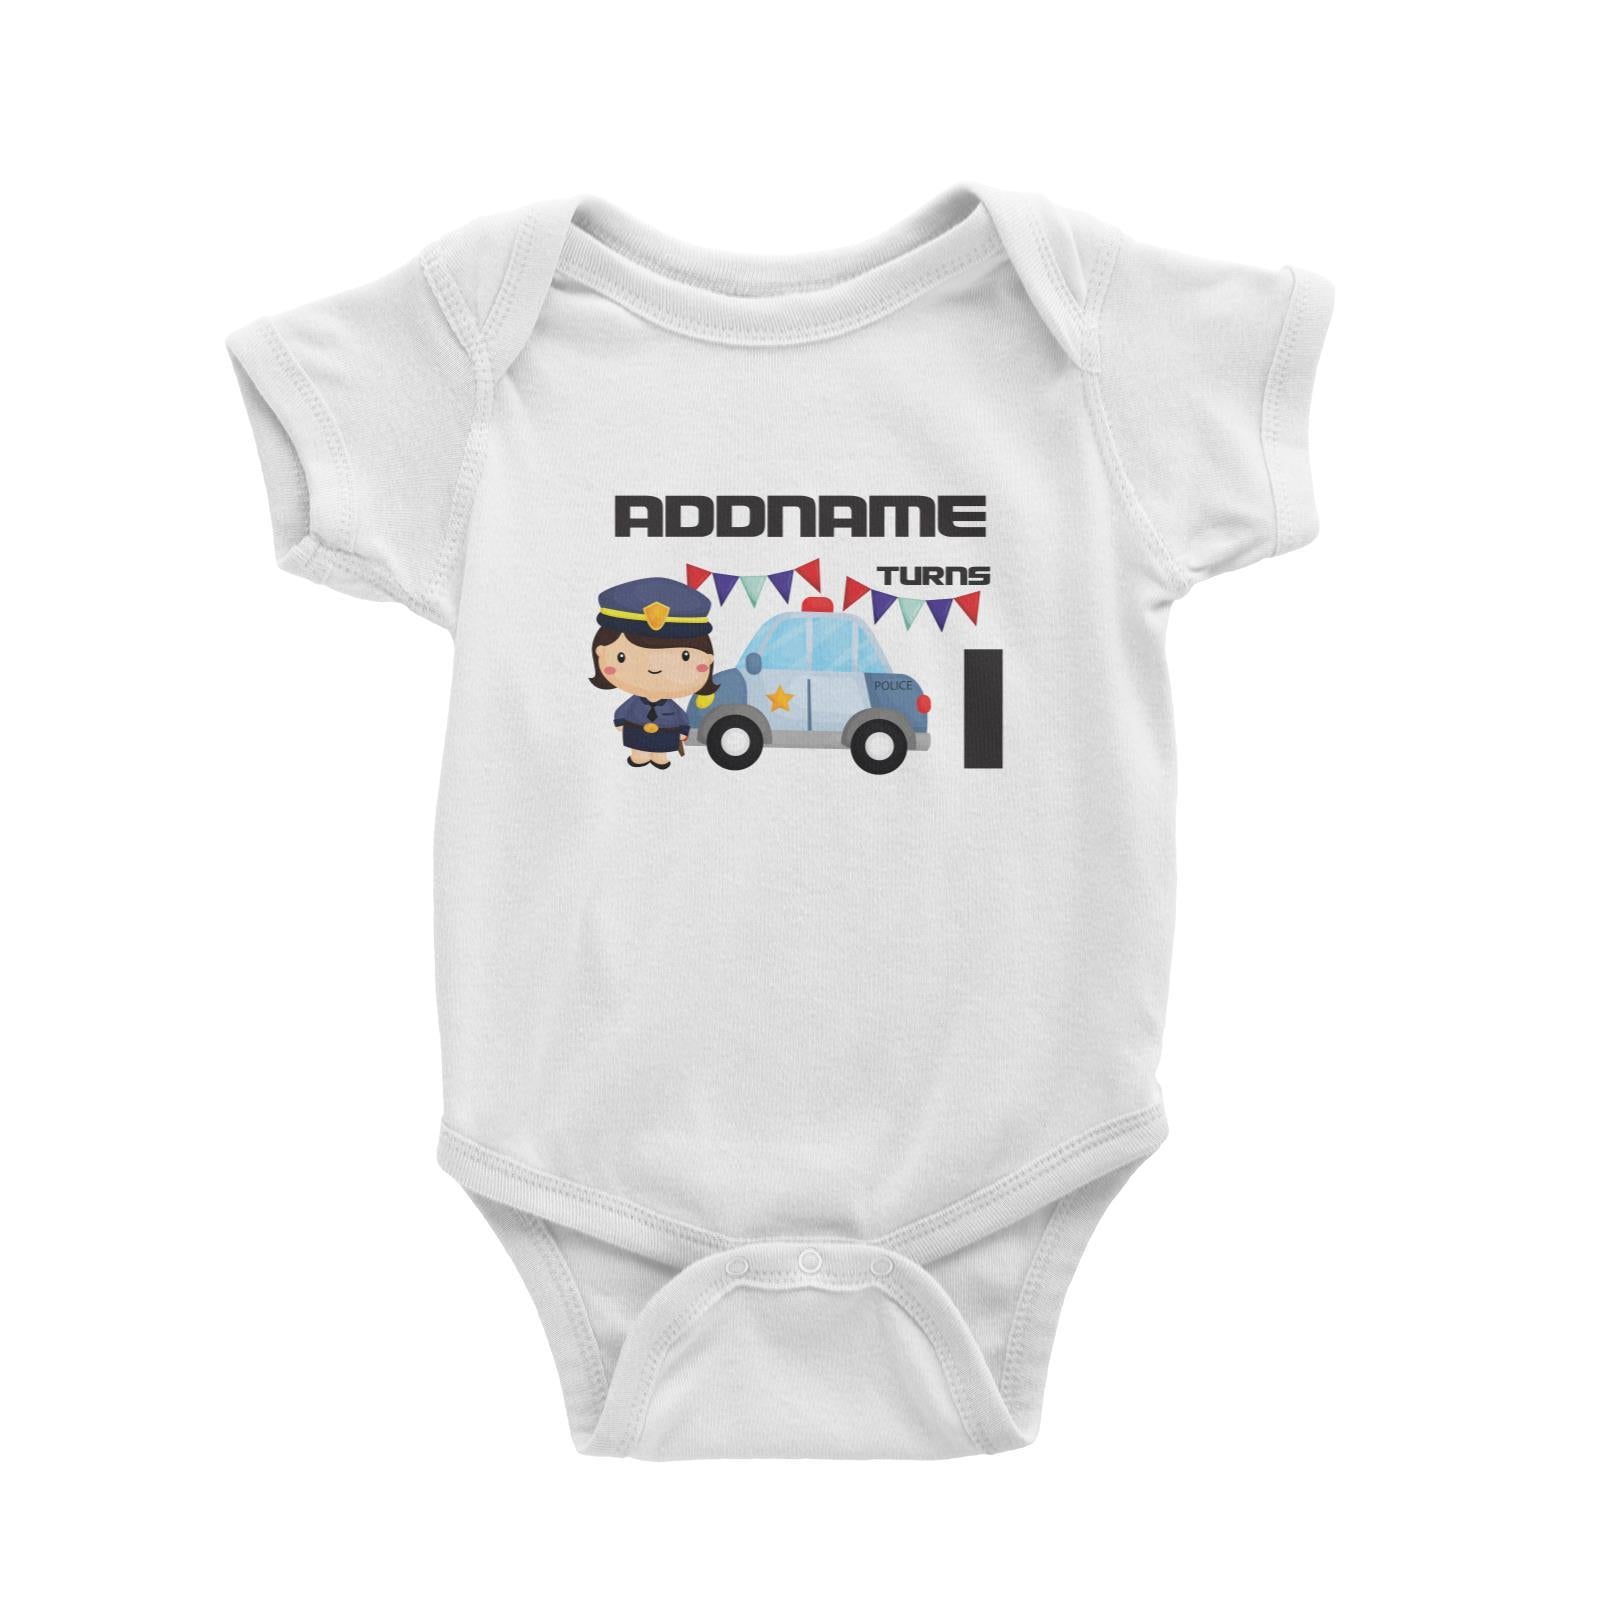 Birthday Police Officer Girl In Suit With Police Car Addname Turns 1 Baby Romper